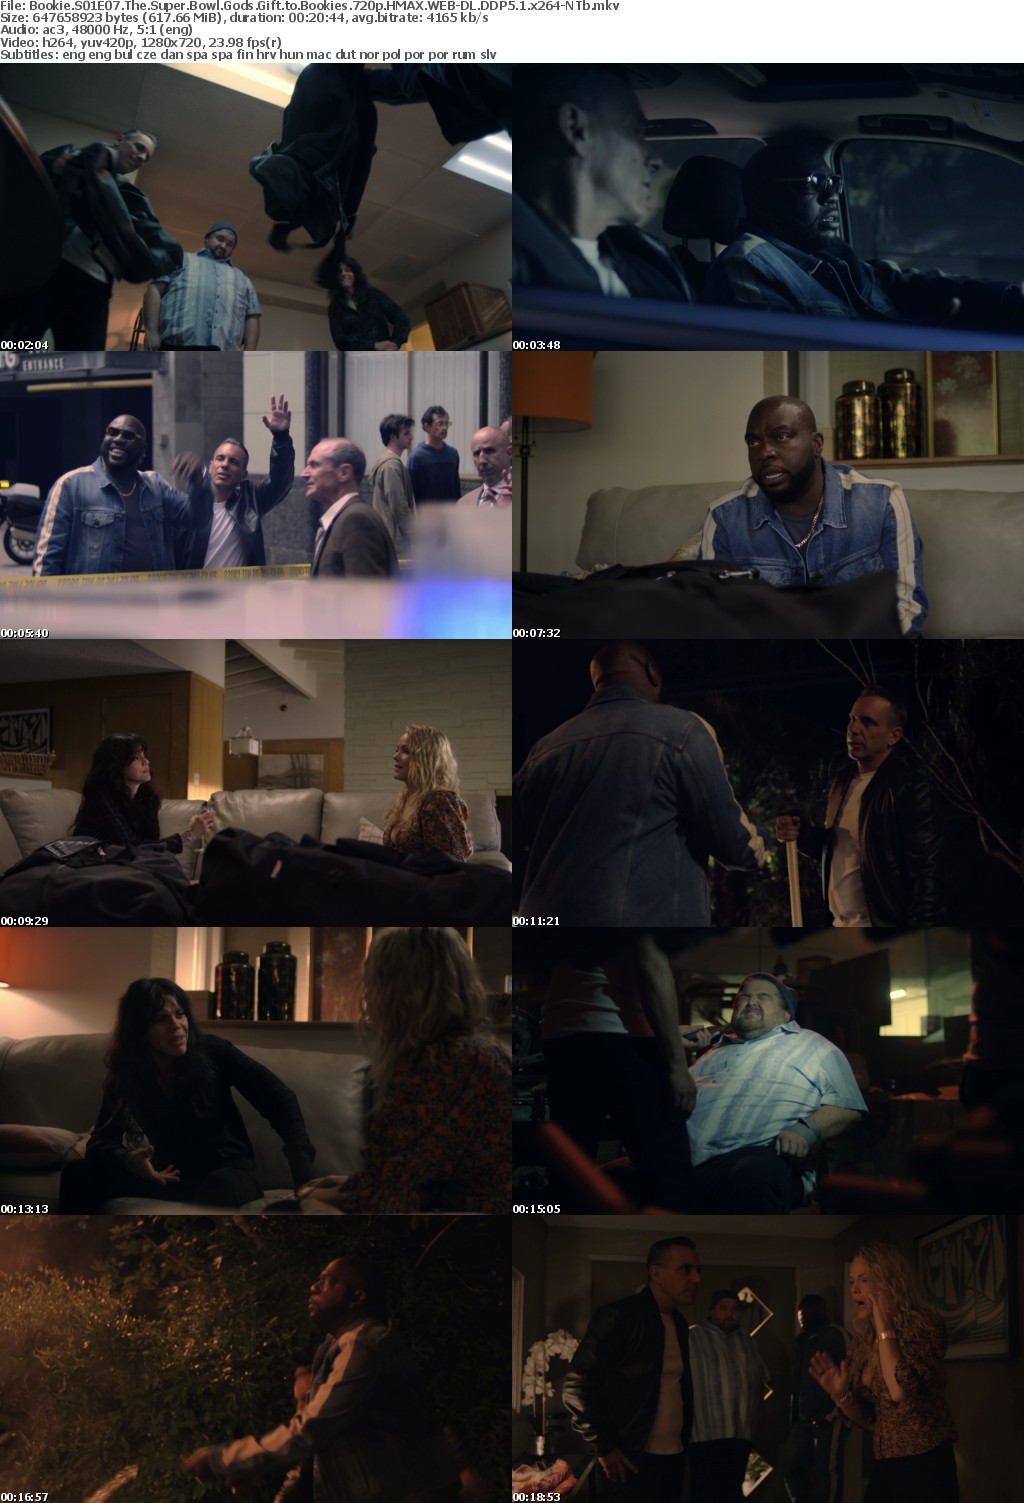 Bookie S01E07 The Super Bowl Gods Gift to Bookies 720p HMAX WEB-DL DDP5 1 x264-NTb